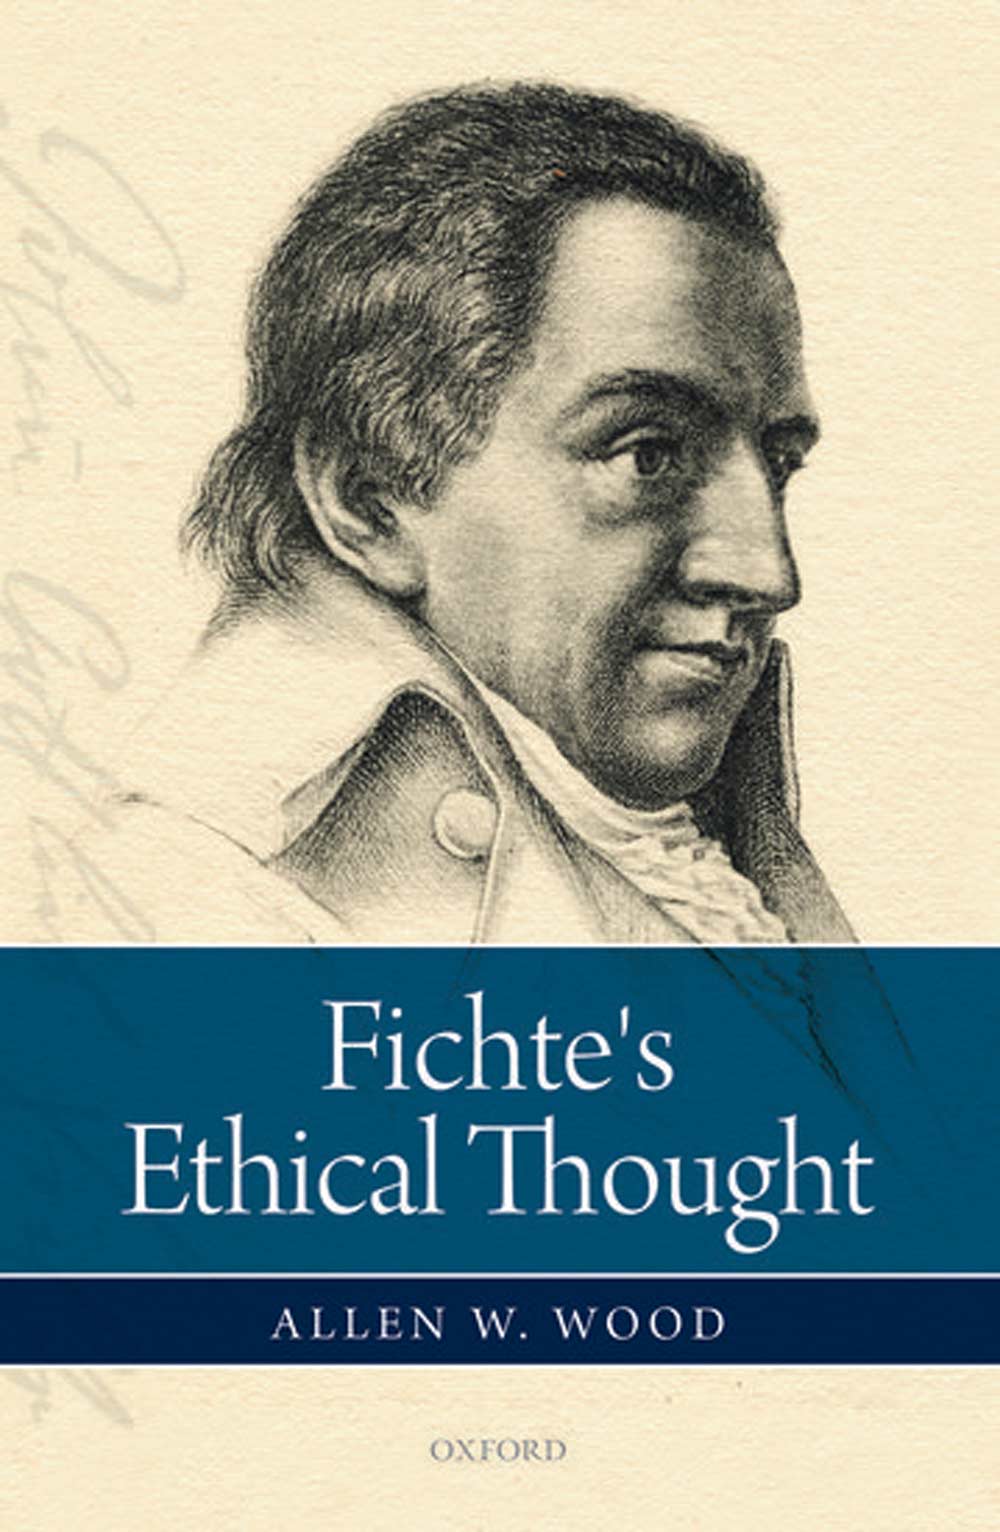 Fichte’s Ethical Thought